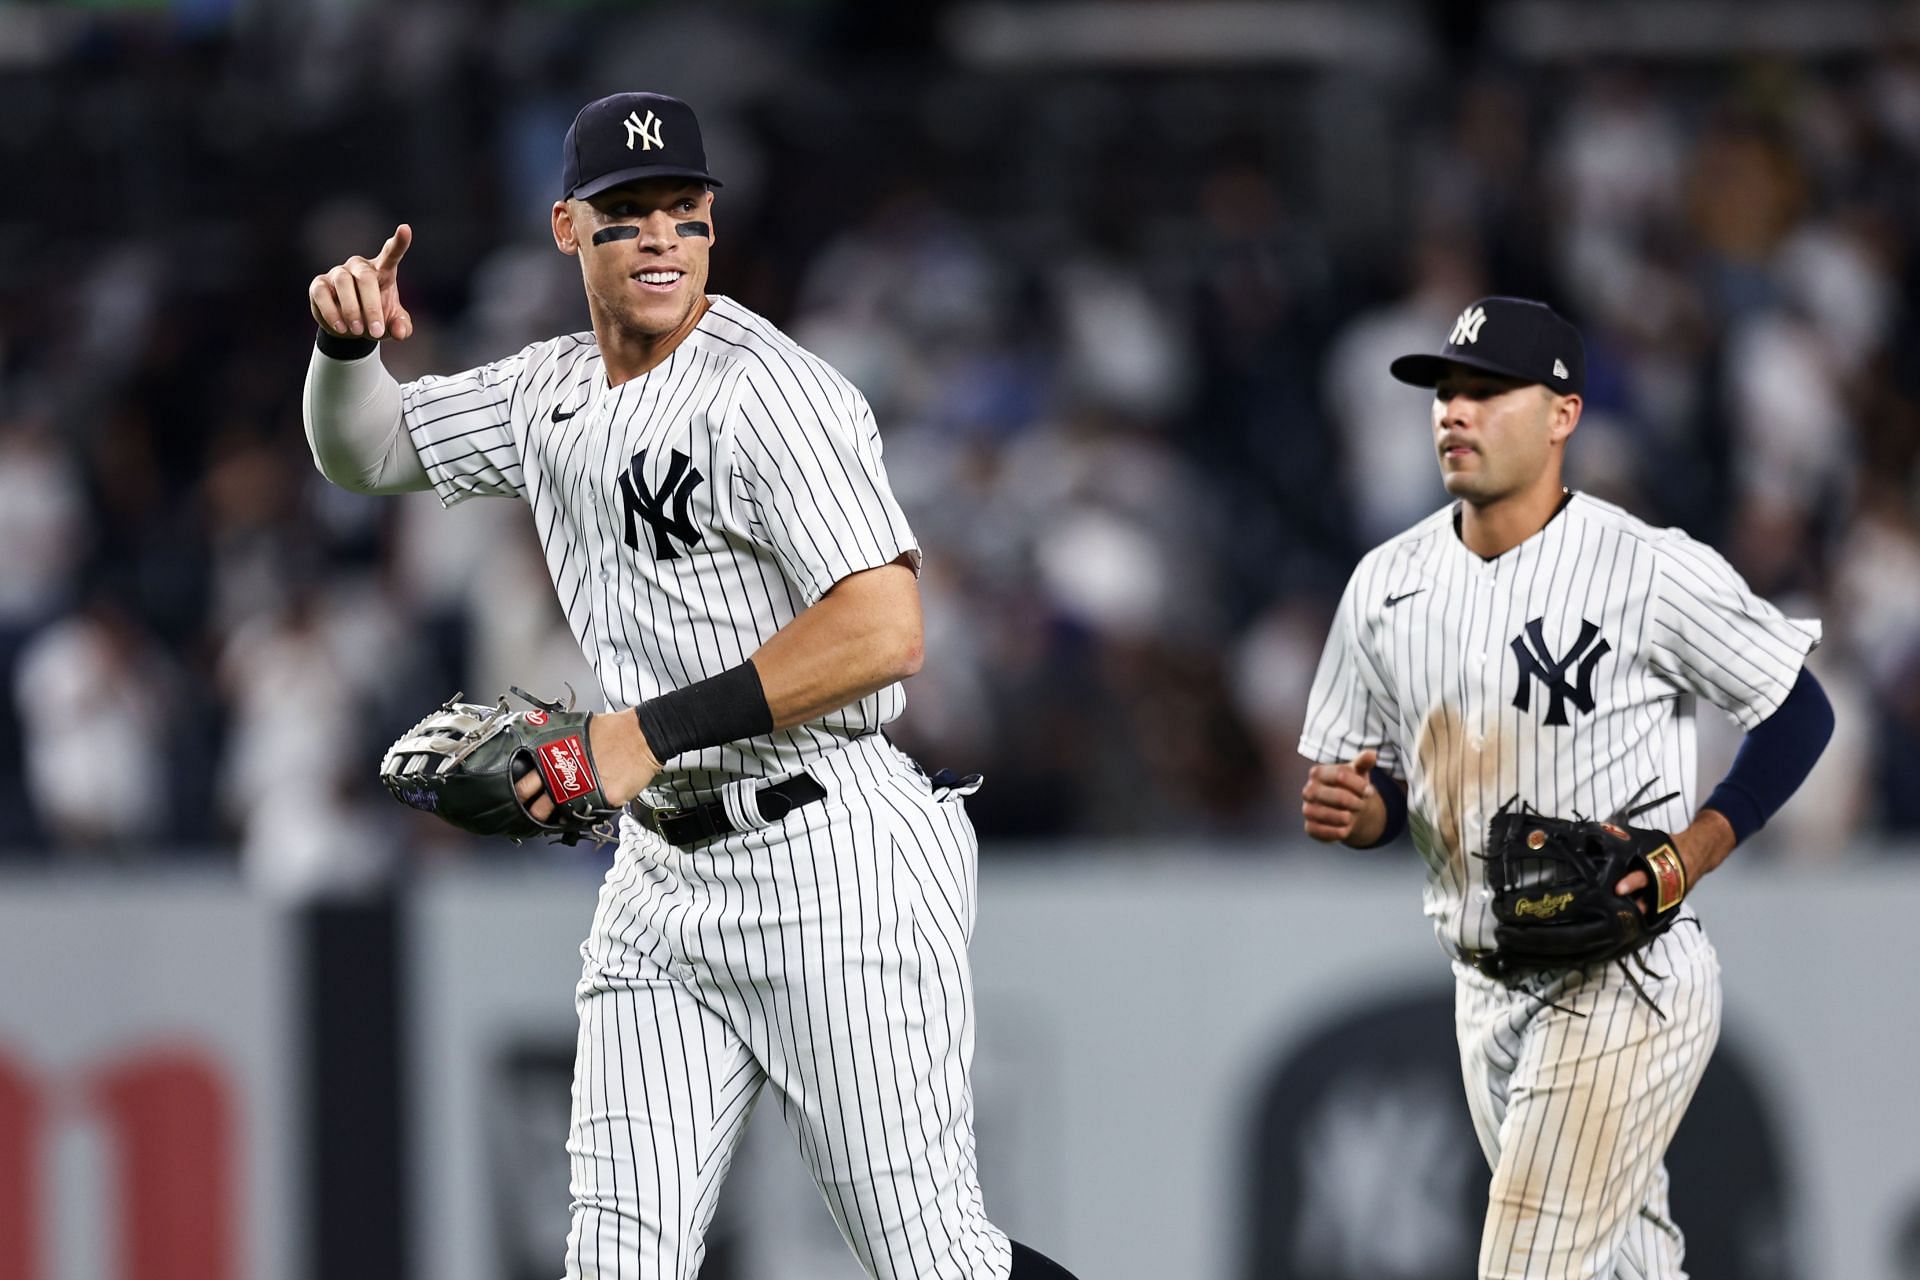 Aaron Judge and the New York Yankees have been the best team in baseball this year.